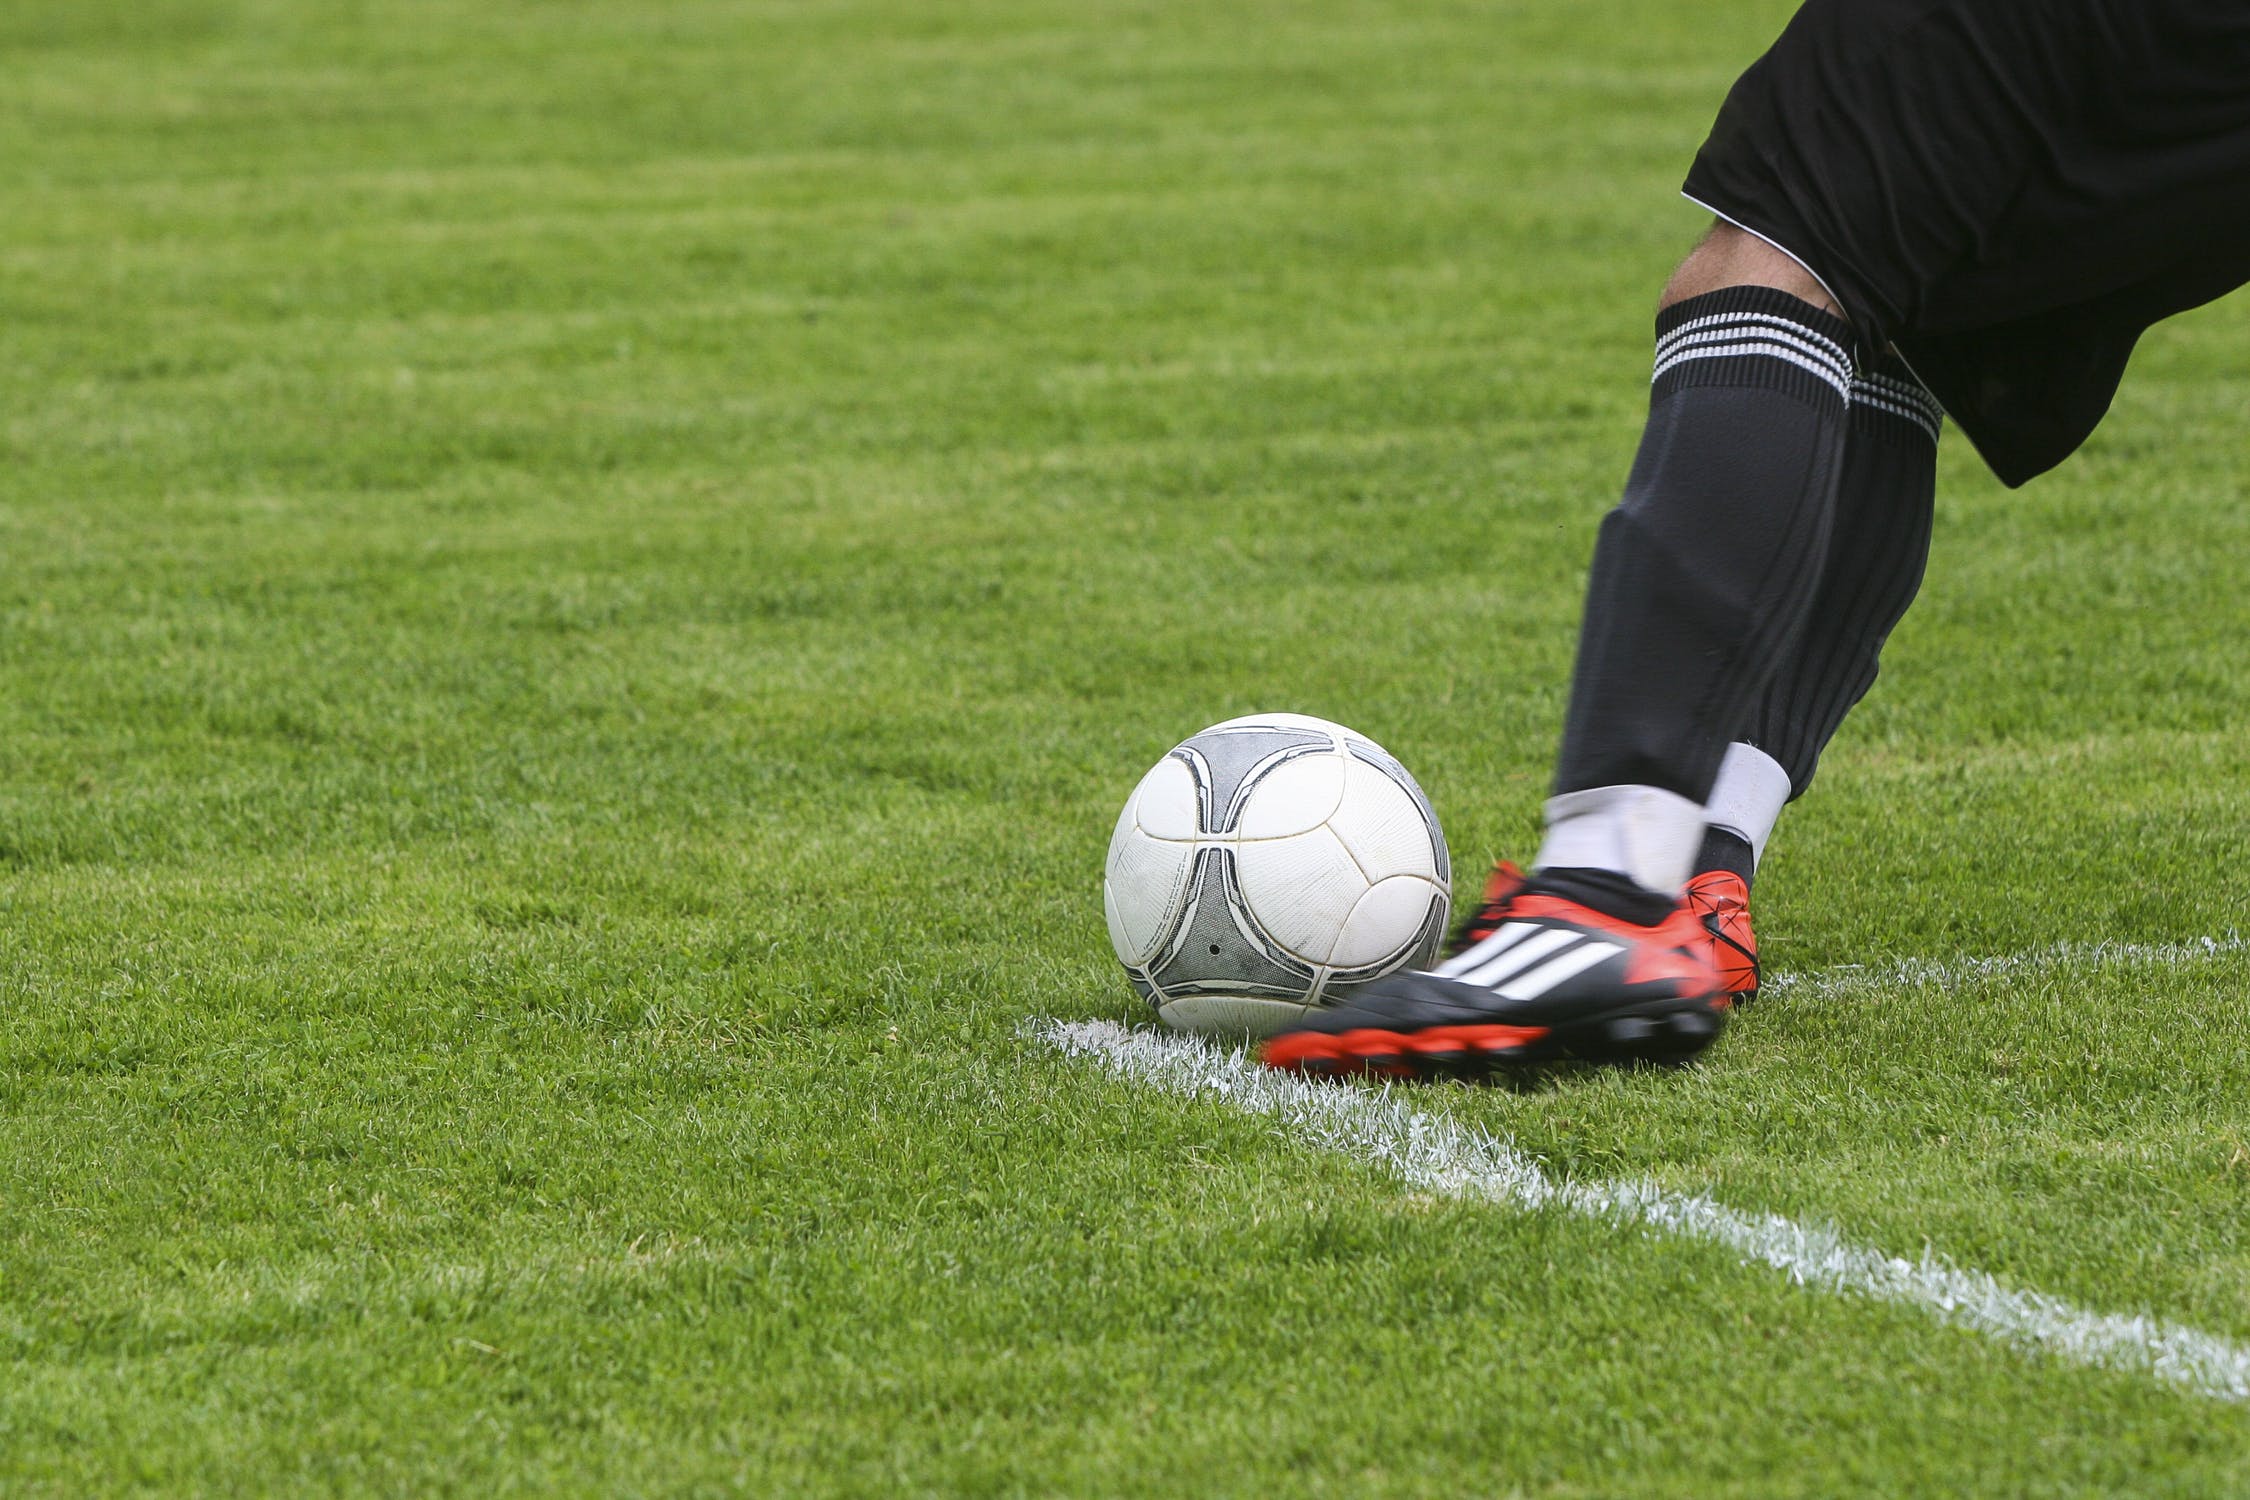 [Blog Post] - Take a Cue from Soccer on Recent Market Volatility | The Retirement Planning Group